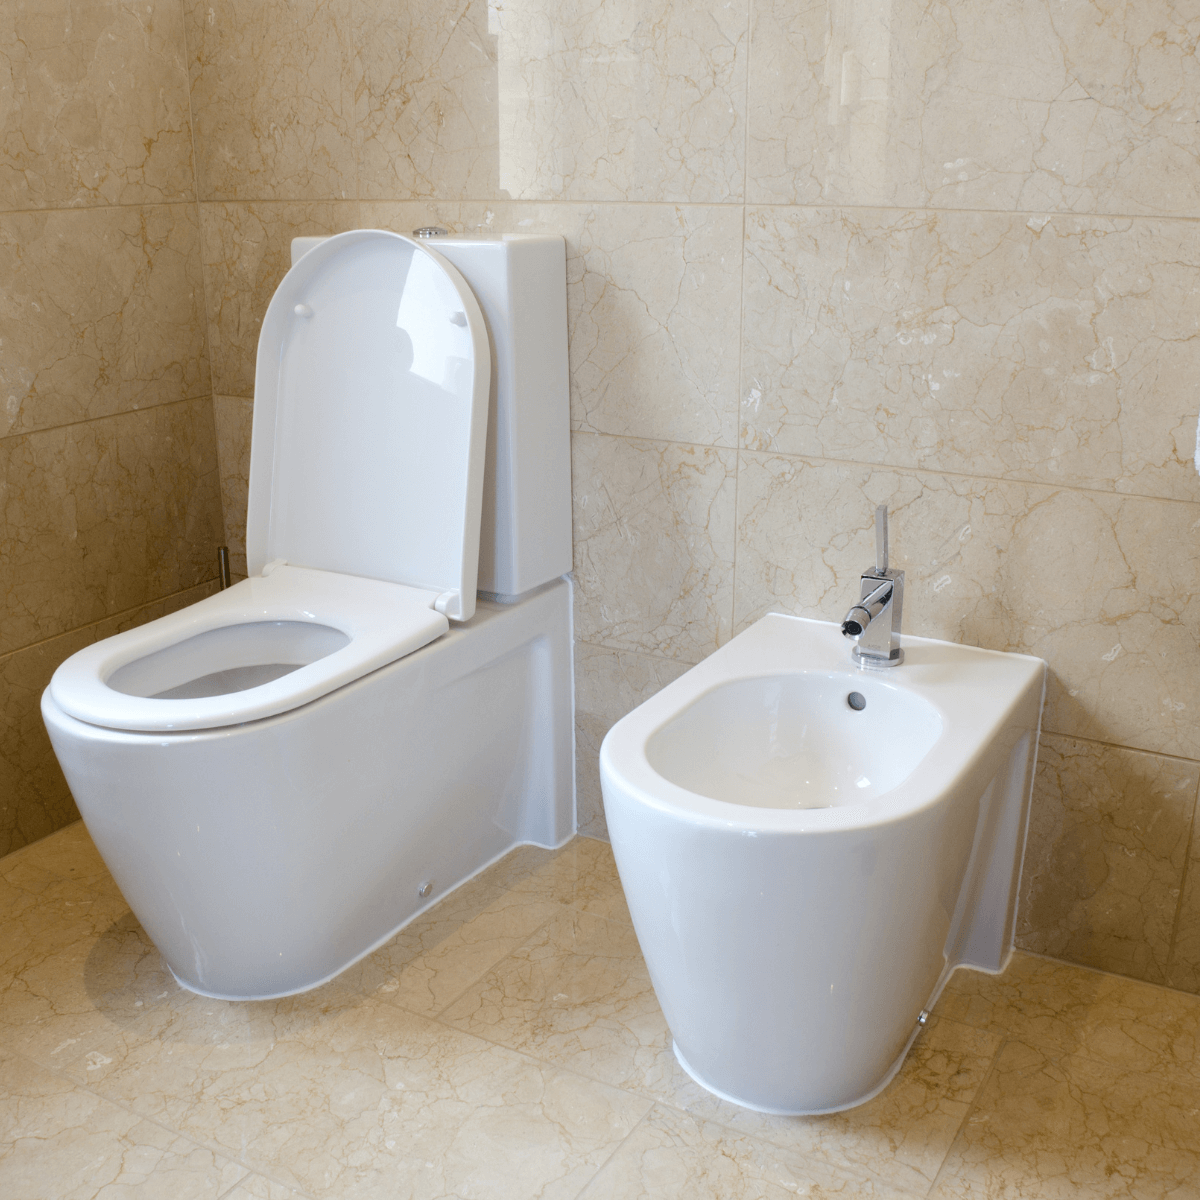 Install a toilet and bidet